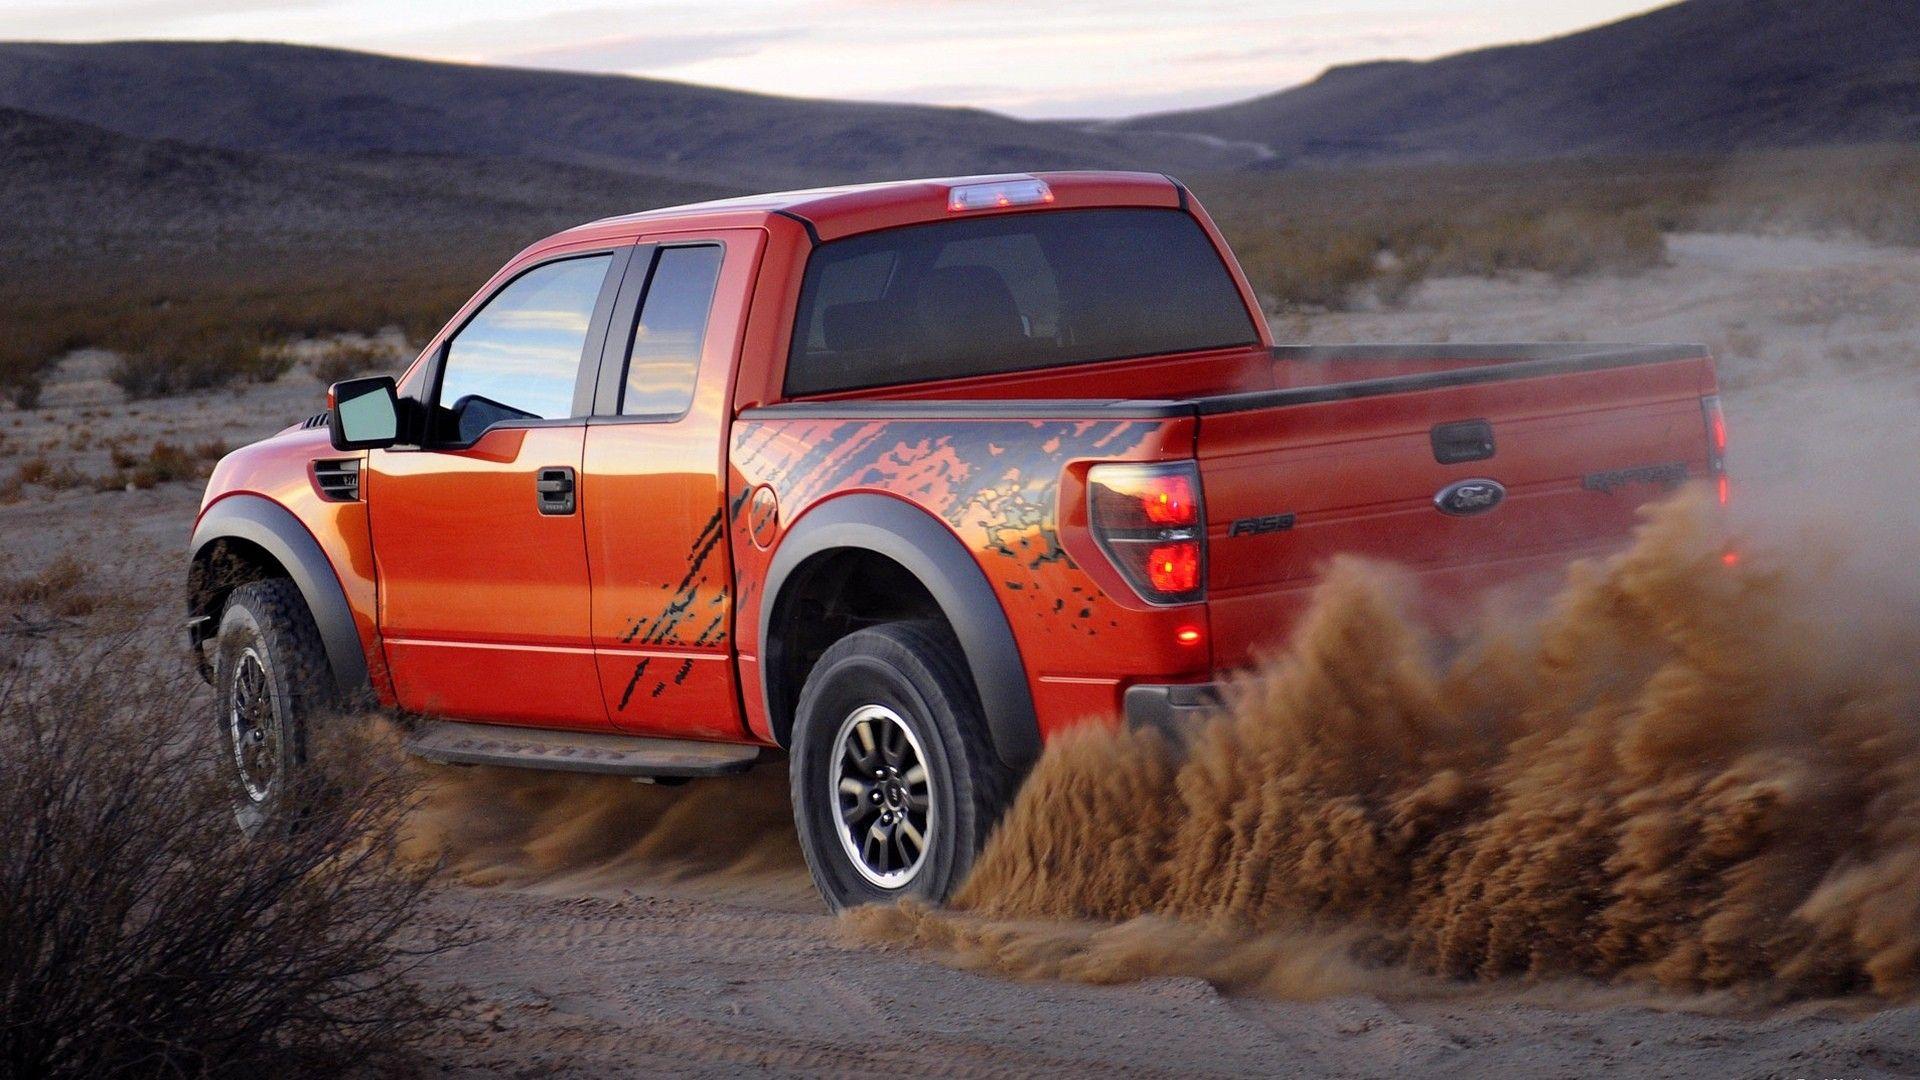 Ford Truck Wallpapers - Wallpaper Cave Ford Raptor Lifted Red.